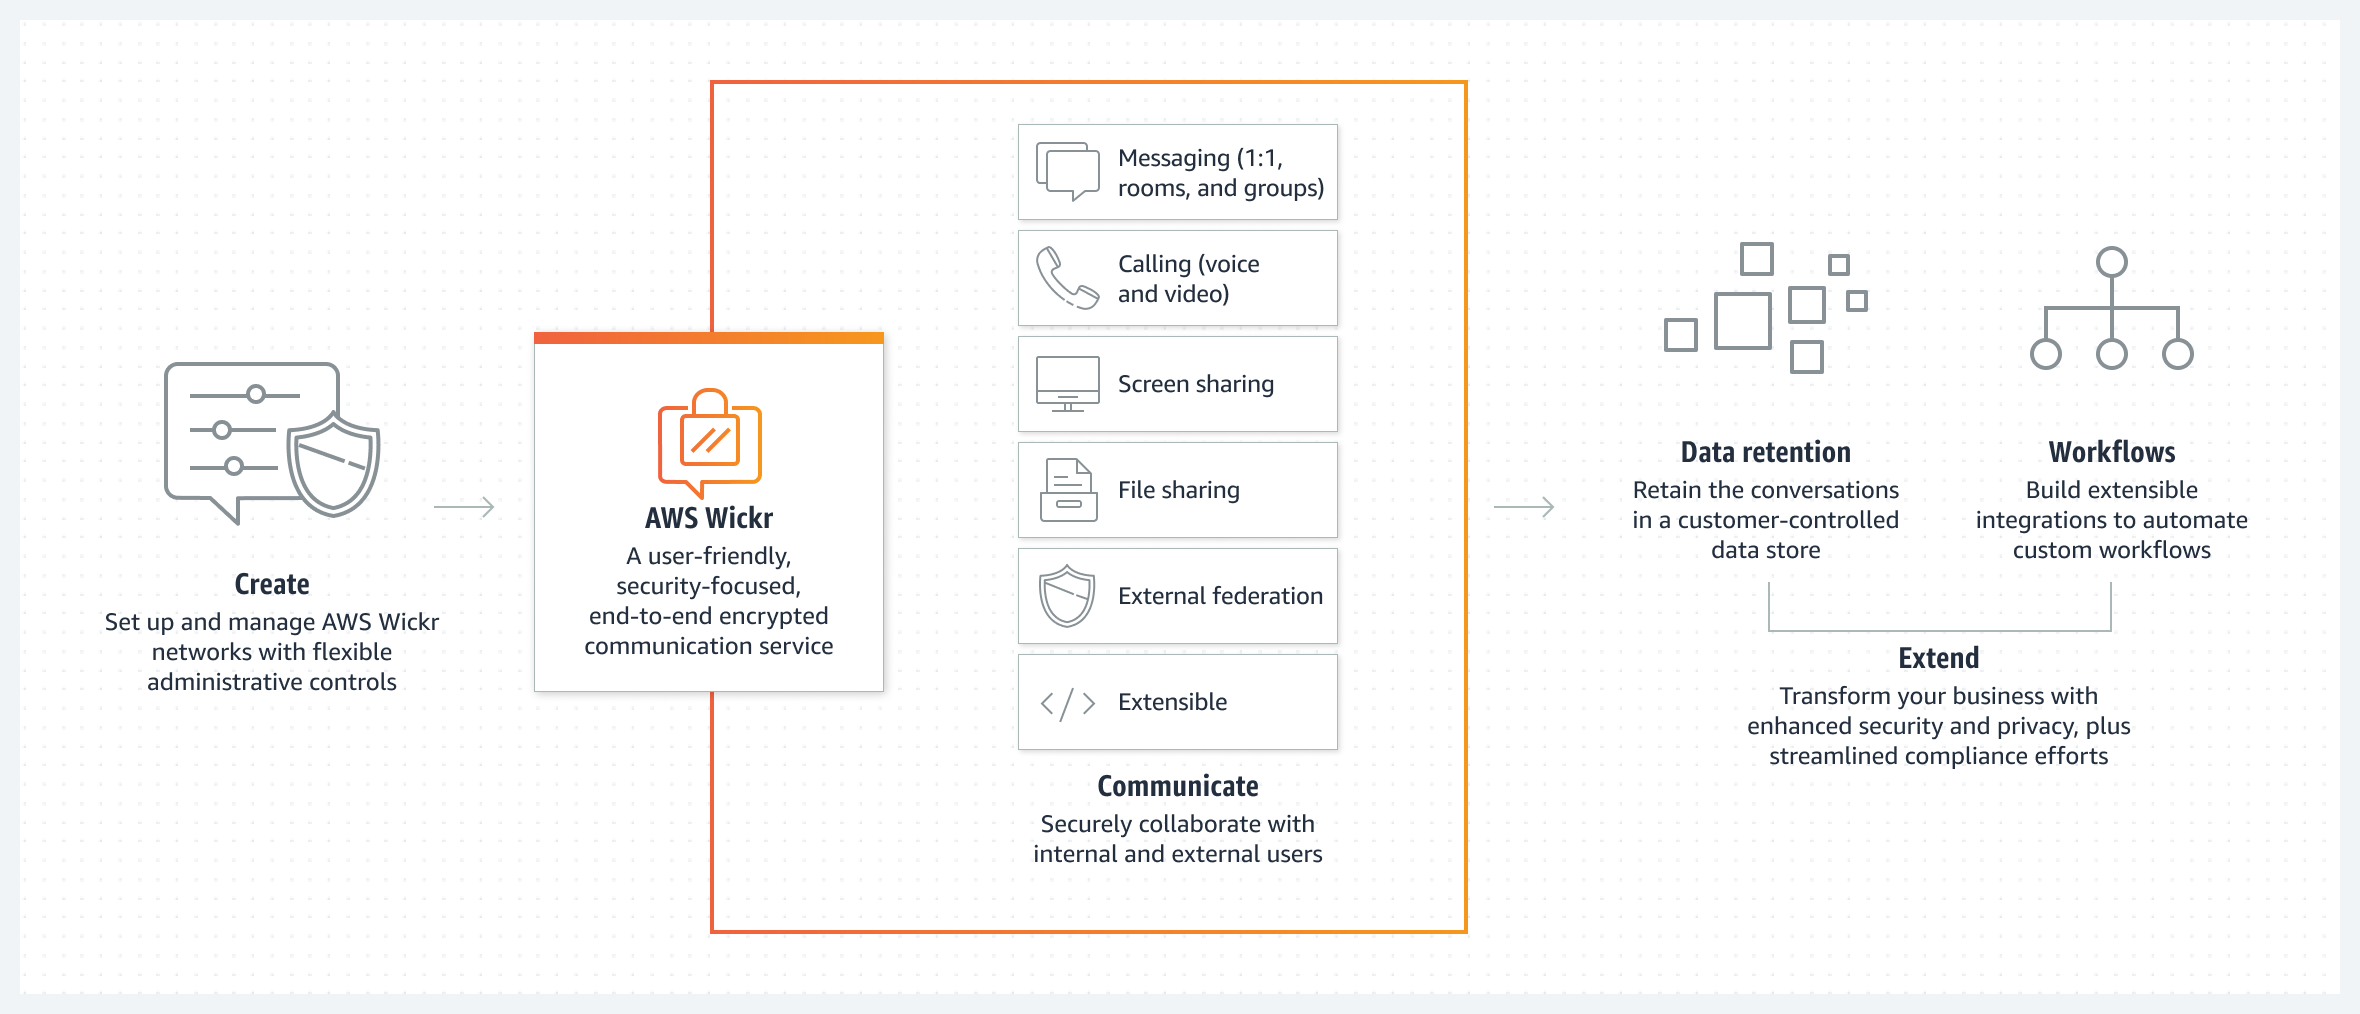 Diagram shows how AWS Wickr allows security-focused collaboration through federation.